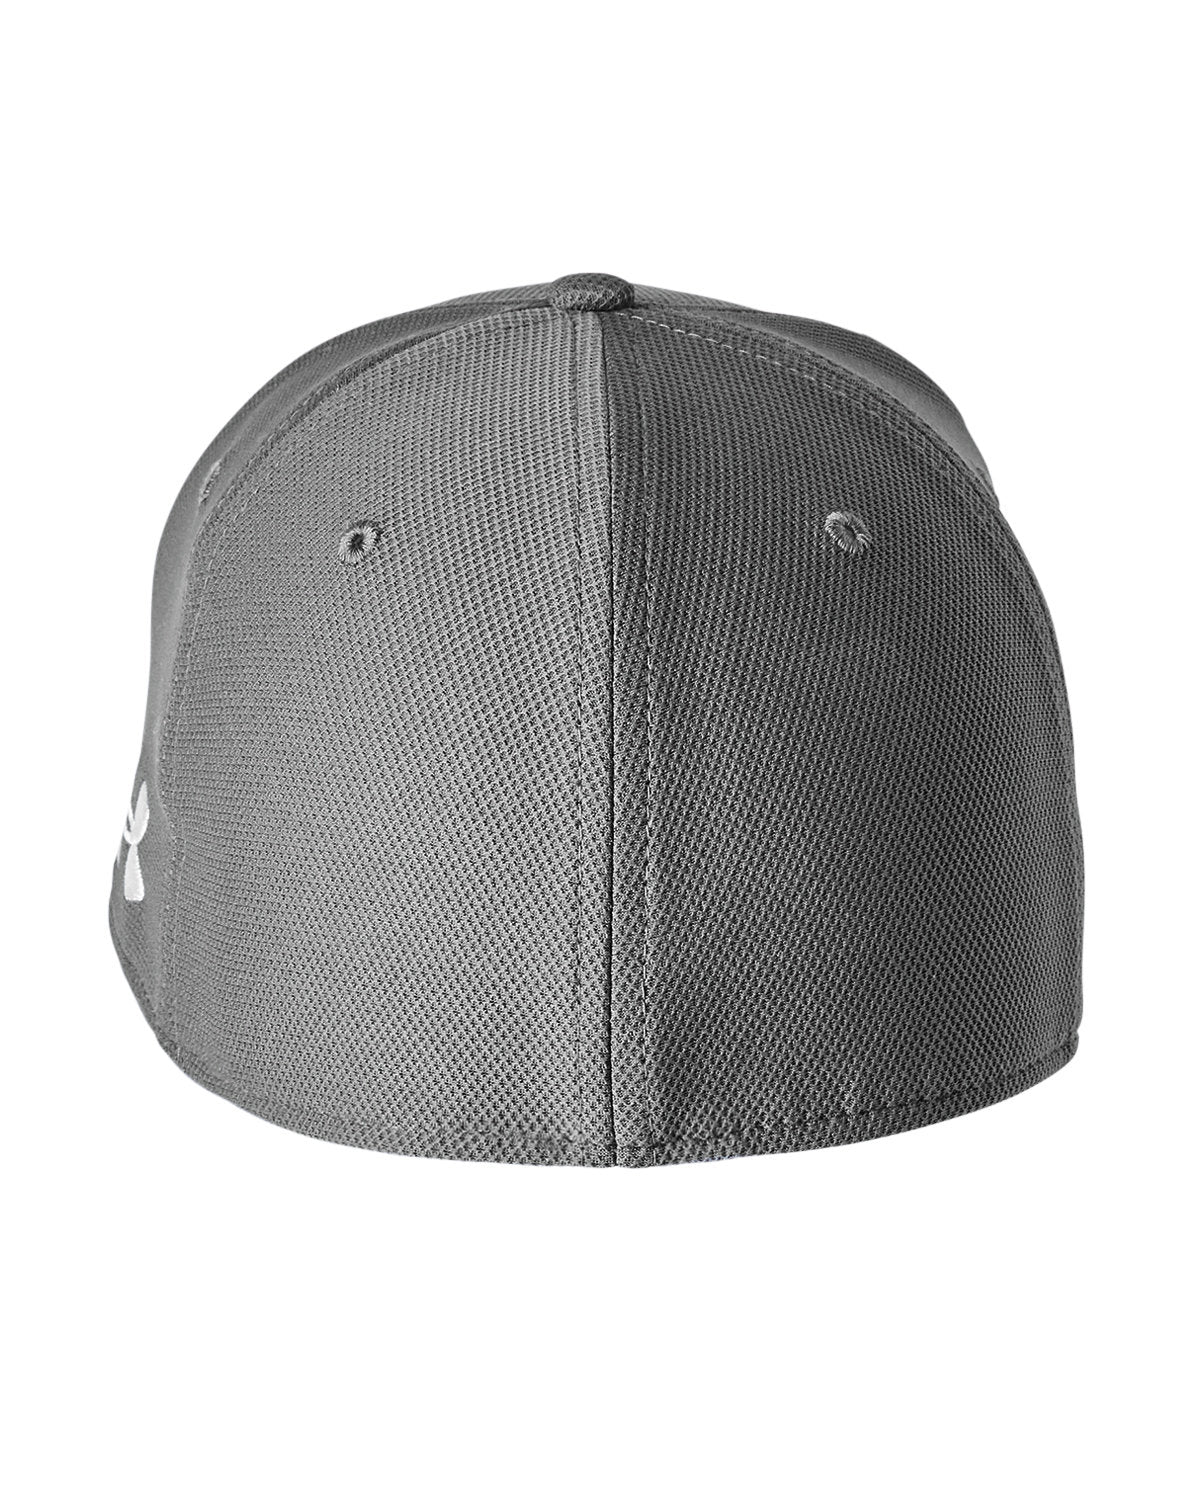 Under Armour Unisex Blitzing Curved Customized Caps, Graphite